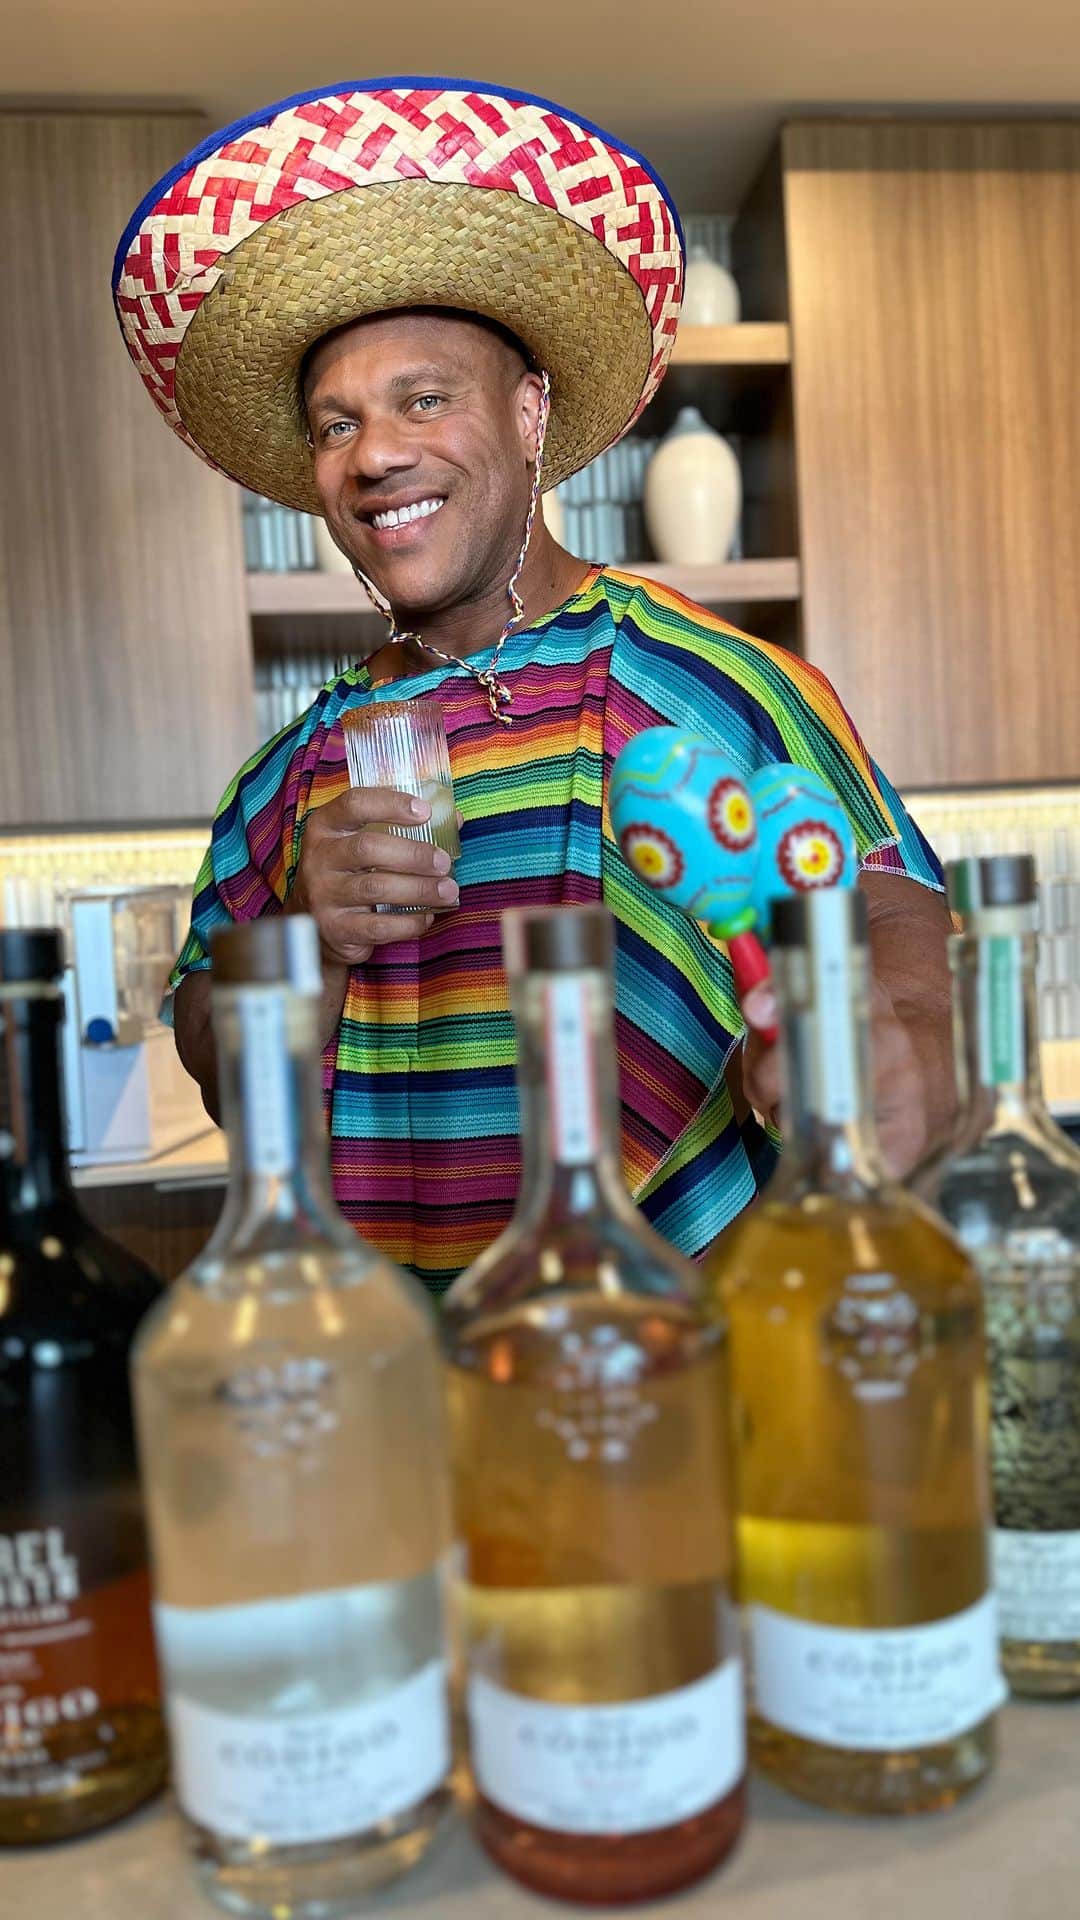 Phil Heathのインスタグラム：「HAPPY CINCO DE MAYO!!!!! 🇲🇽  I’m making two of my favorite drinks- @codigo1530 Spicy Mango Lemonade with our Rosa Blanco and a Smoked @codigo1530 Mezcal Old Fashioned without the Cherry 😏   We wish you happy and safe drinking! #HastaLaCruz 🥃」